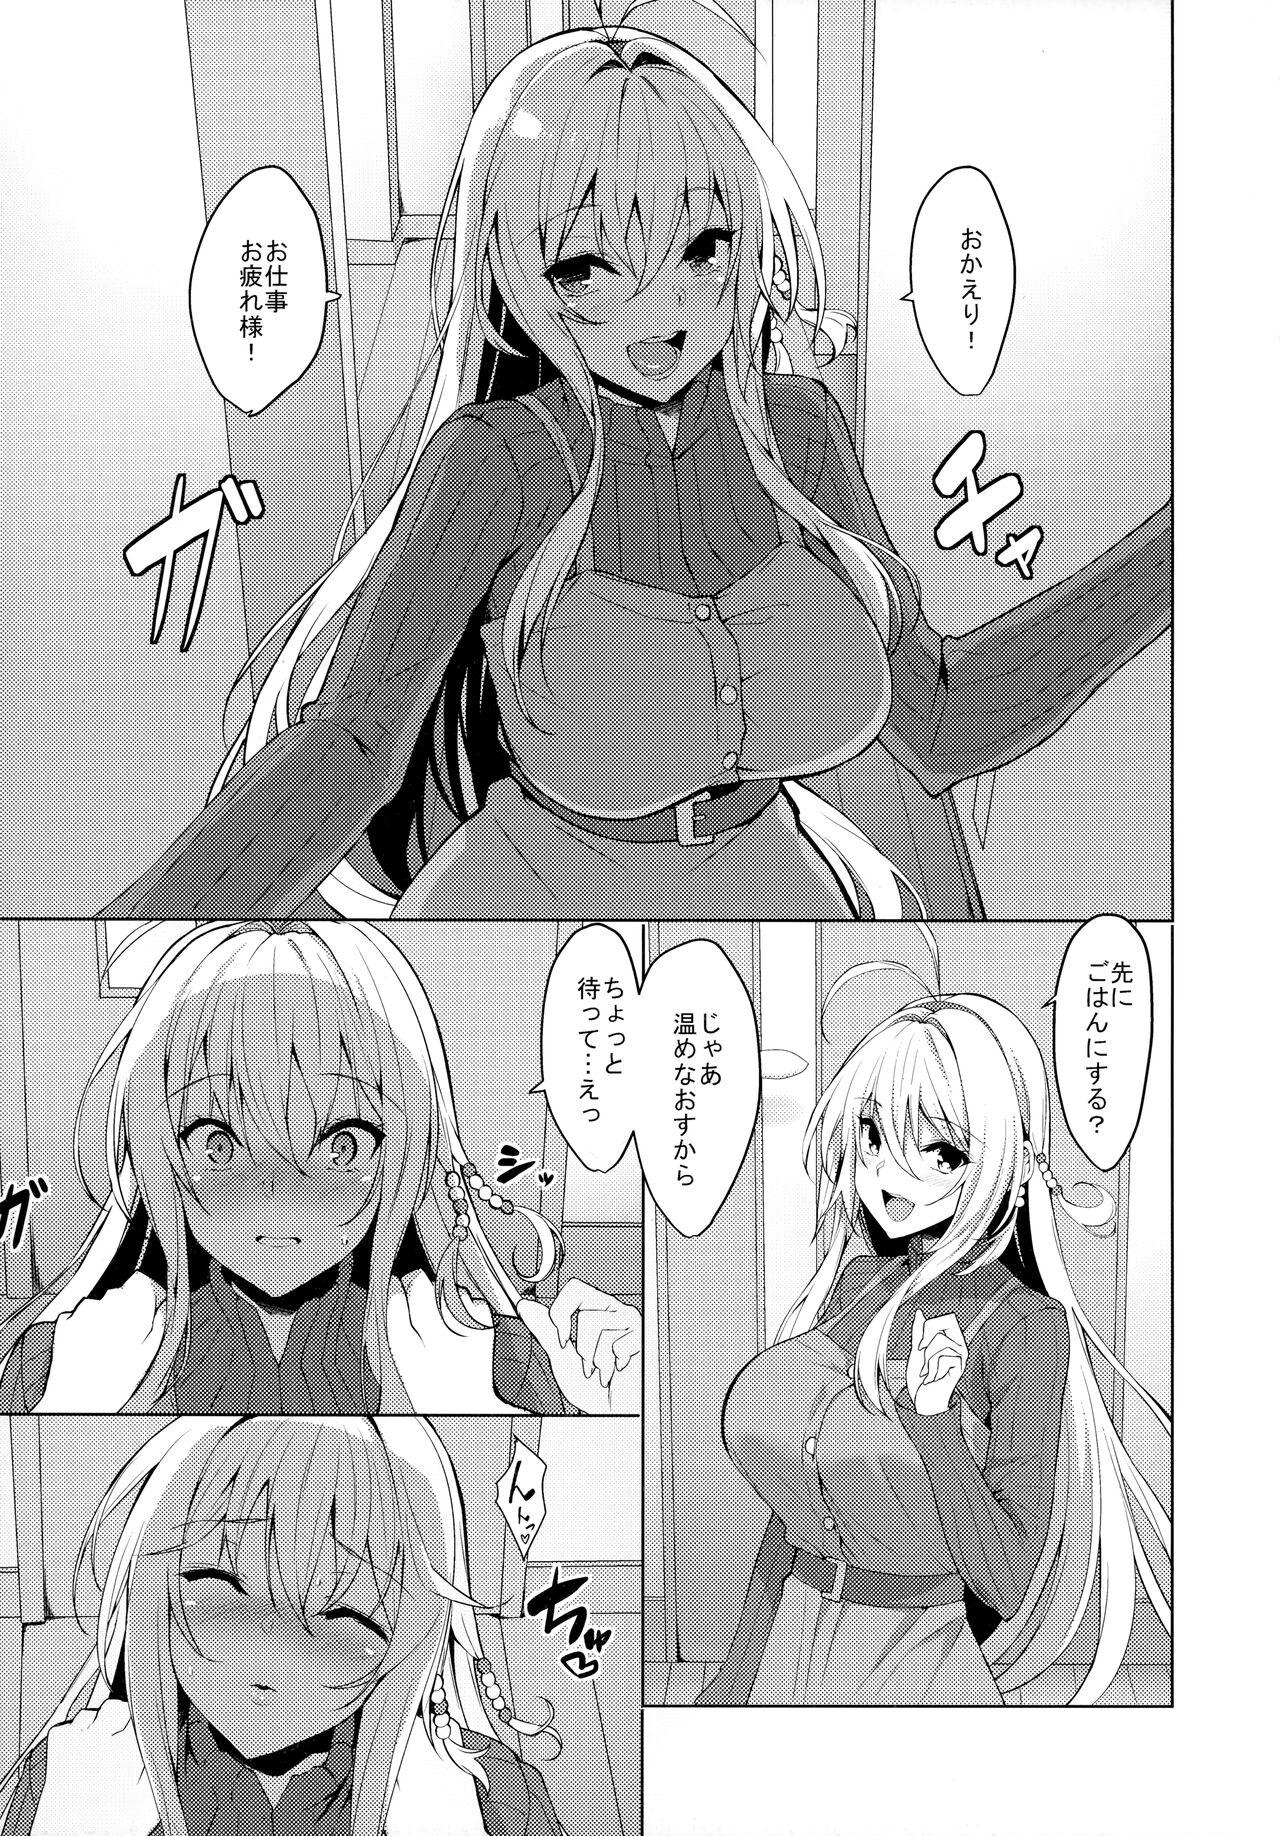 Special Locations 恋人は弦巻マキさん - Voiceroid Caliente - Page 4